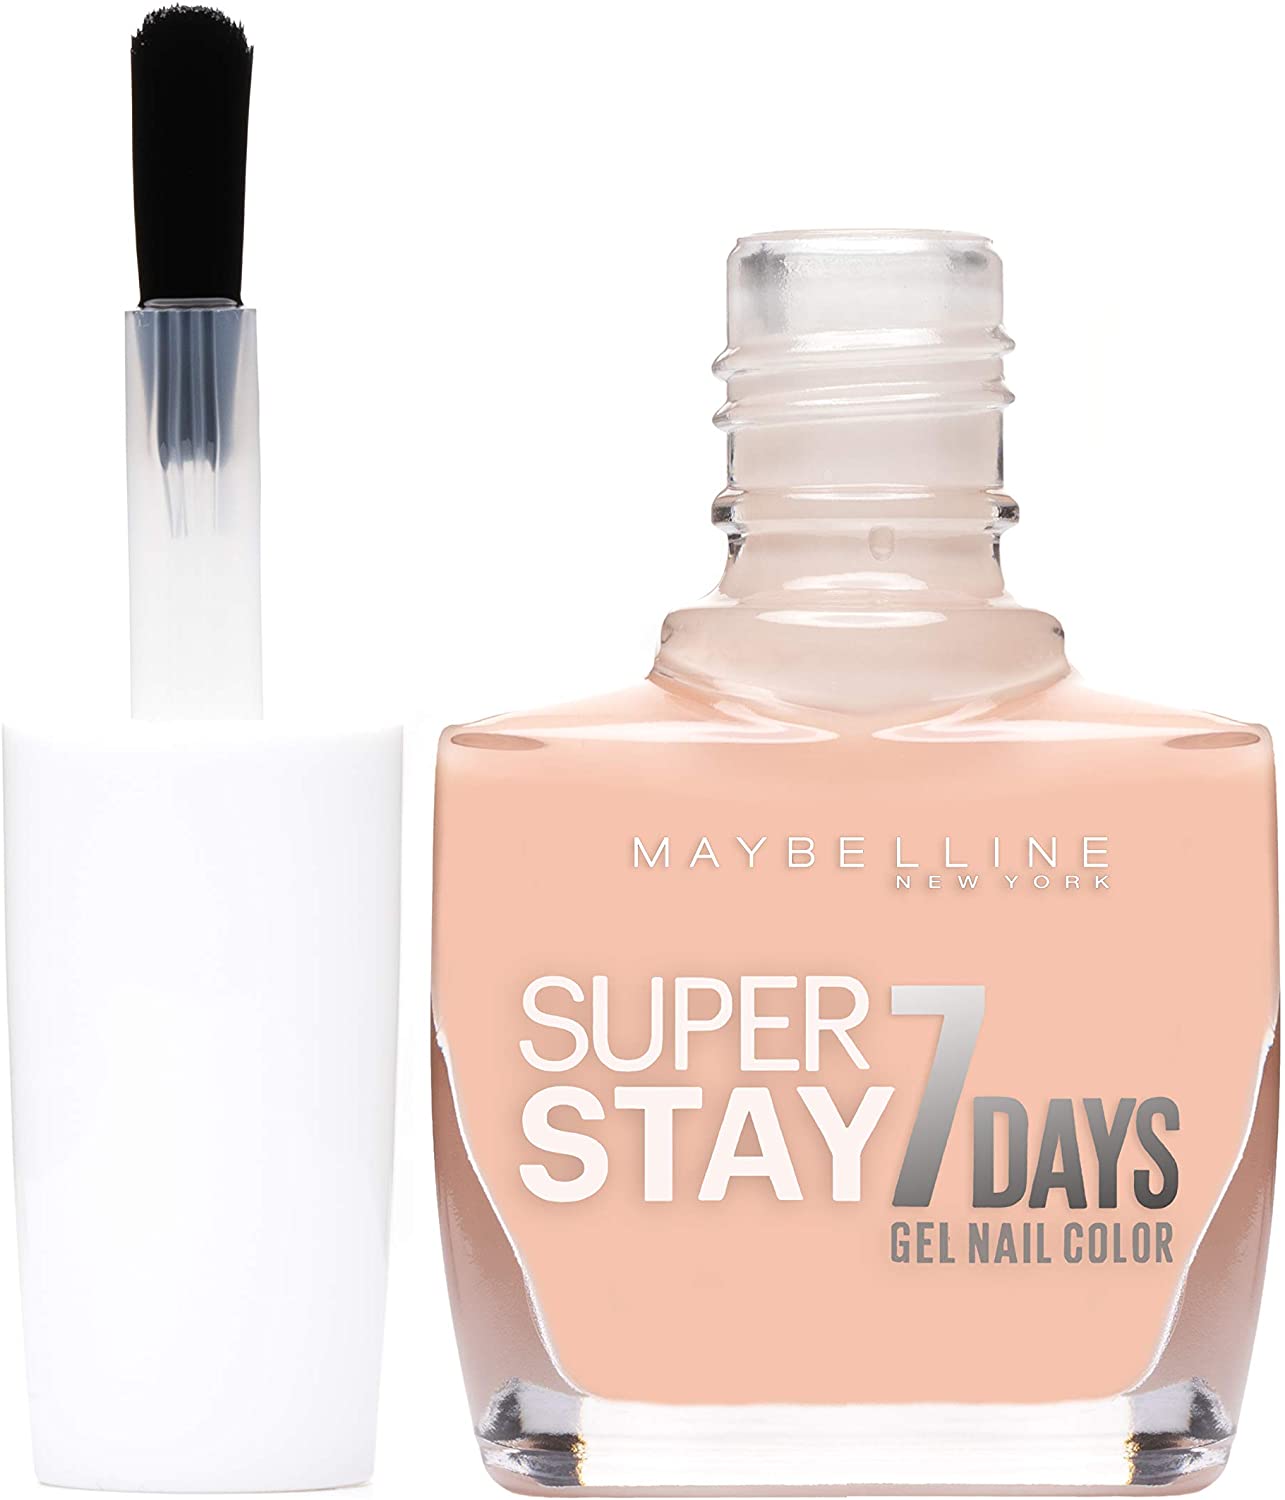 Maybelline SuperStay 7 Days Nail Polish French Manicure